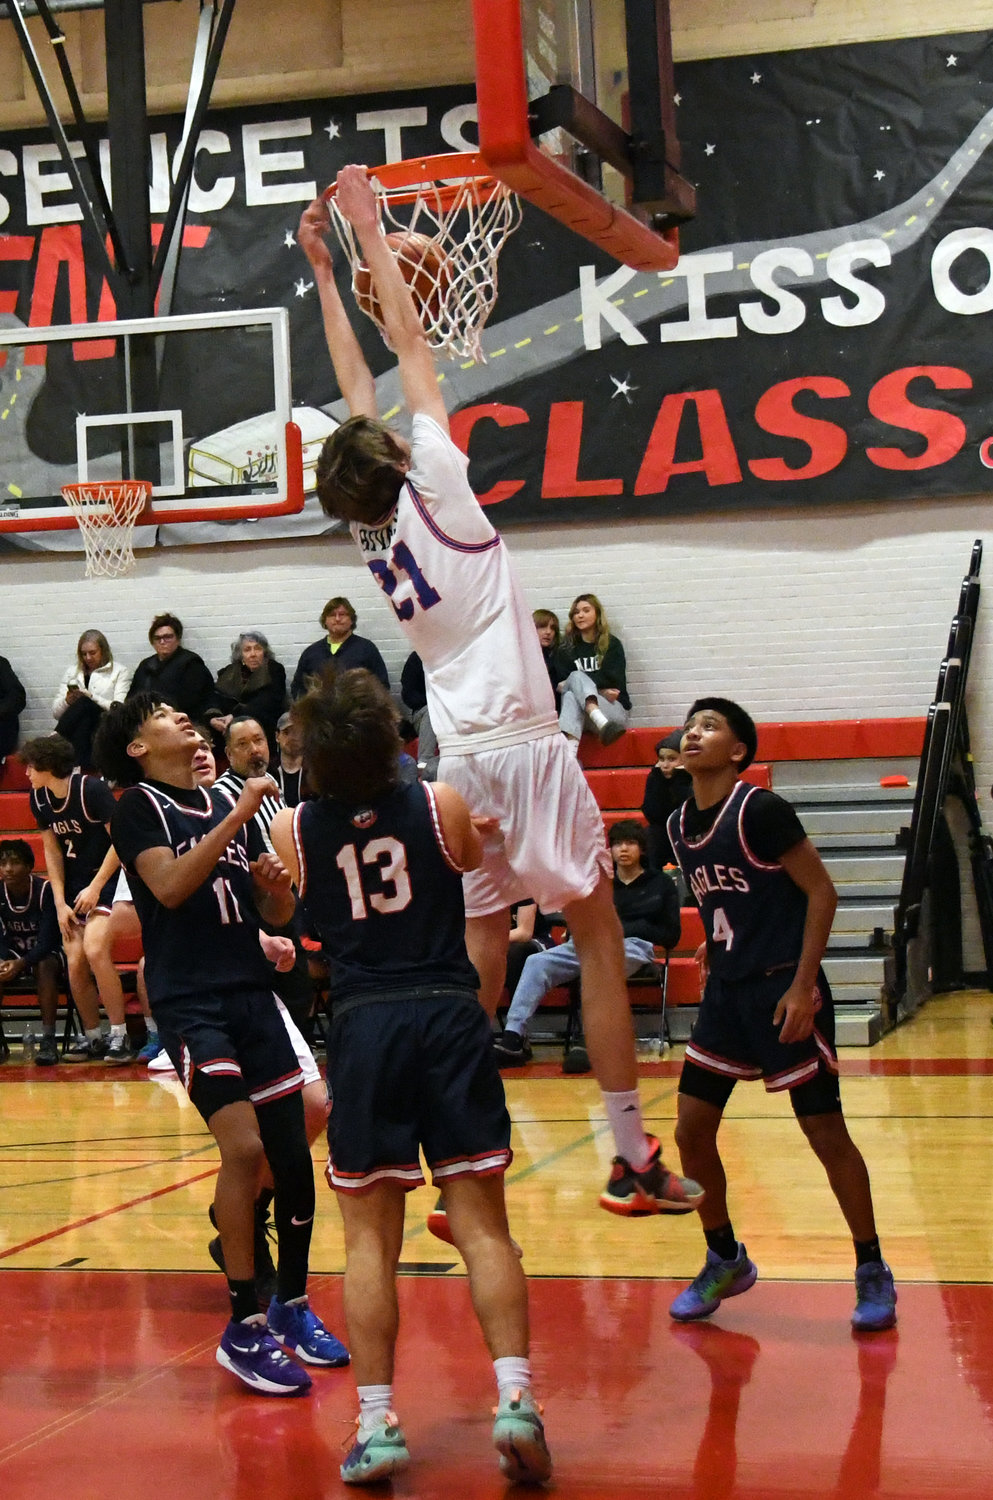 Rivals junior Stuart Dow slams down a putback dunk, inspiring a wave of momentum and a roaring crowd in the first half.